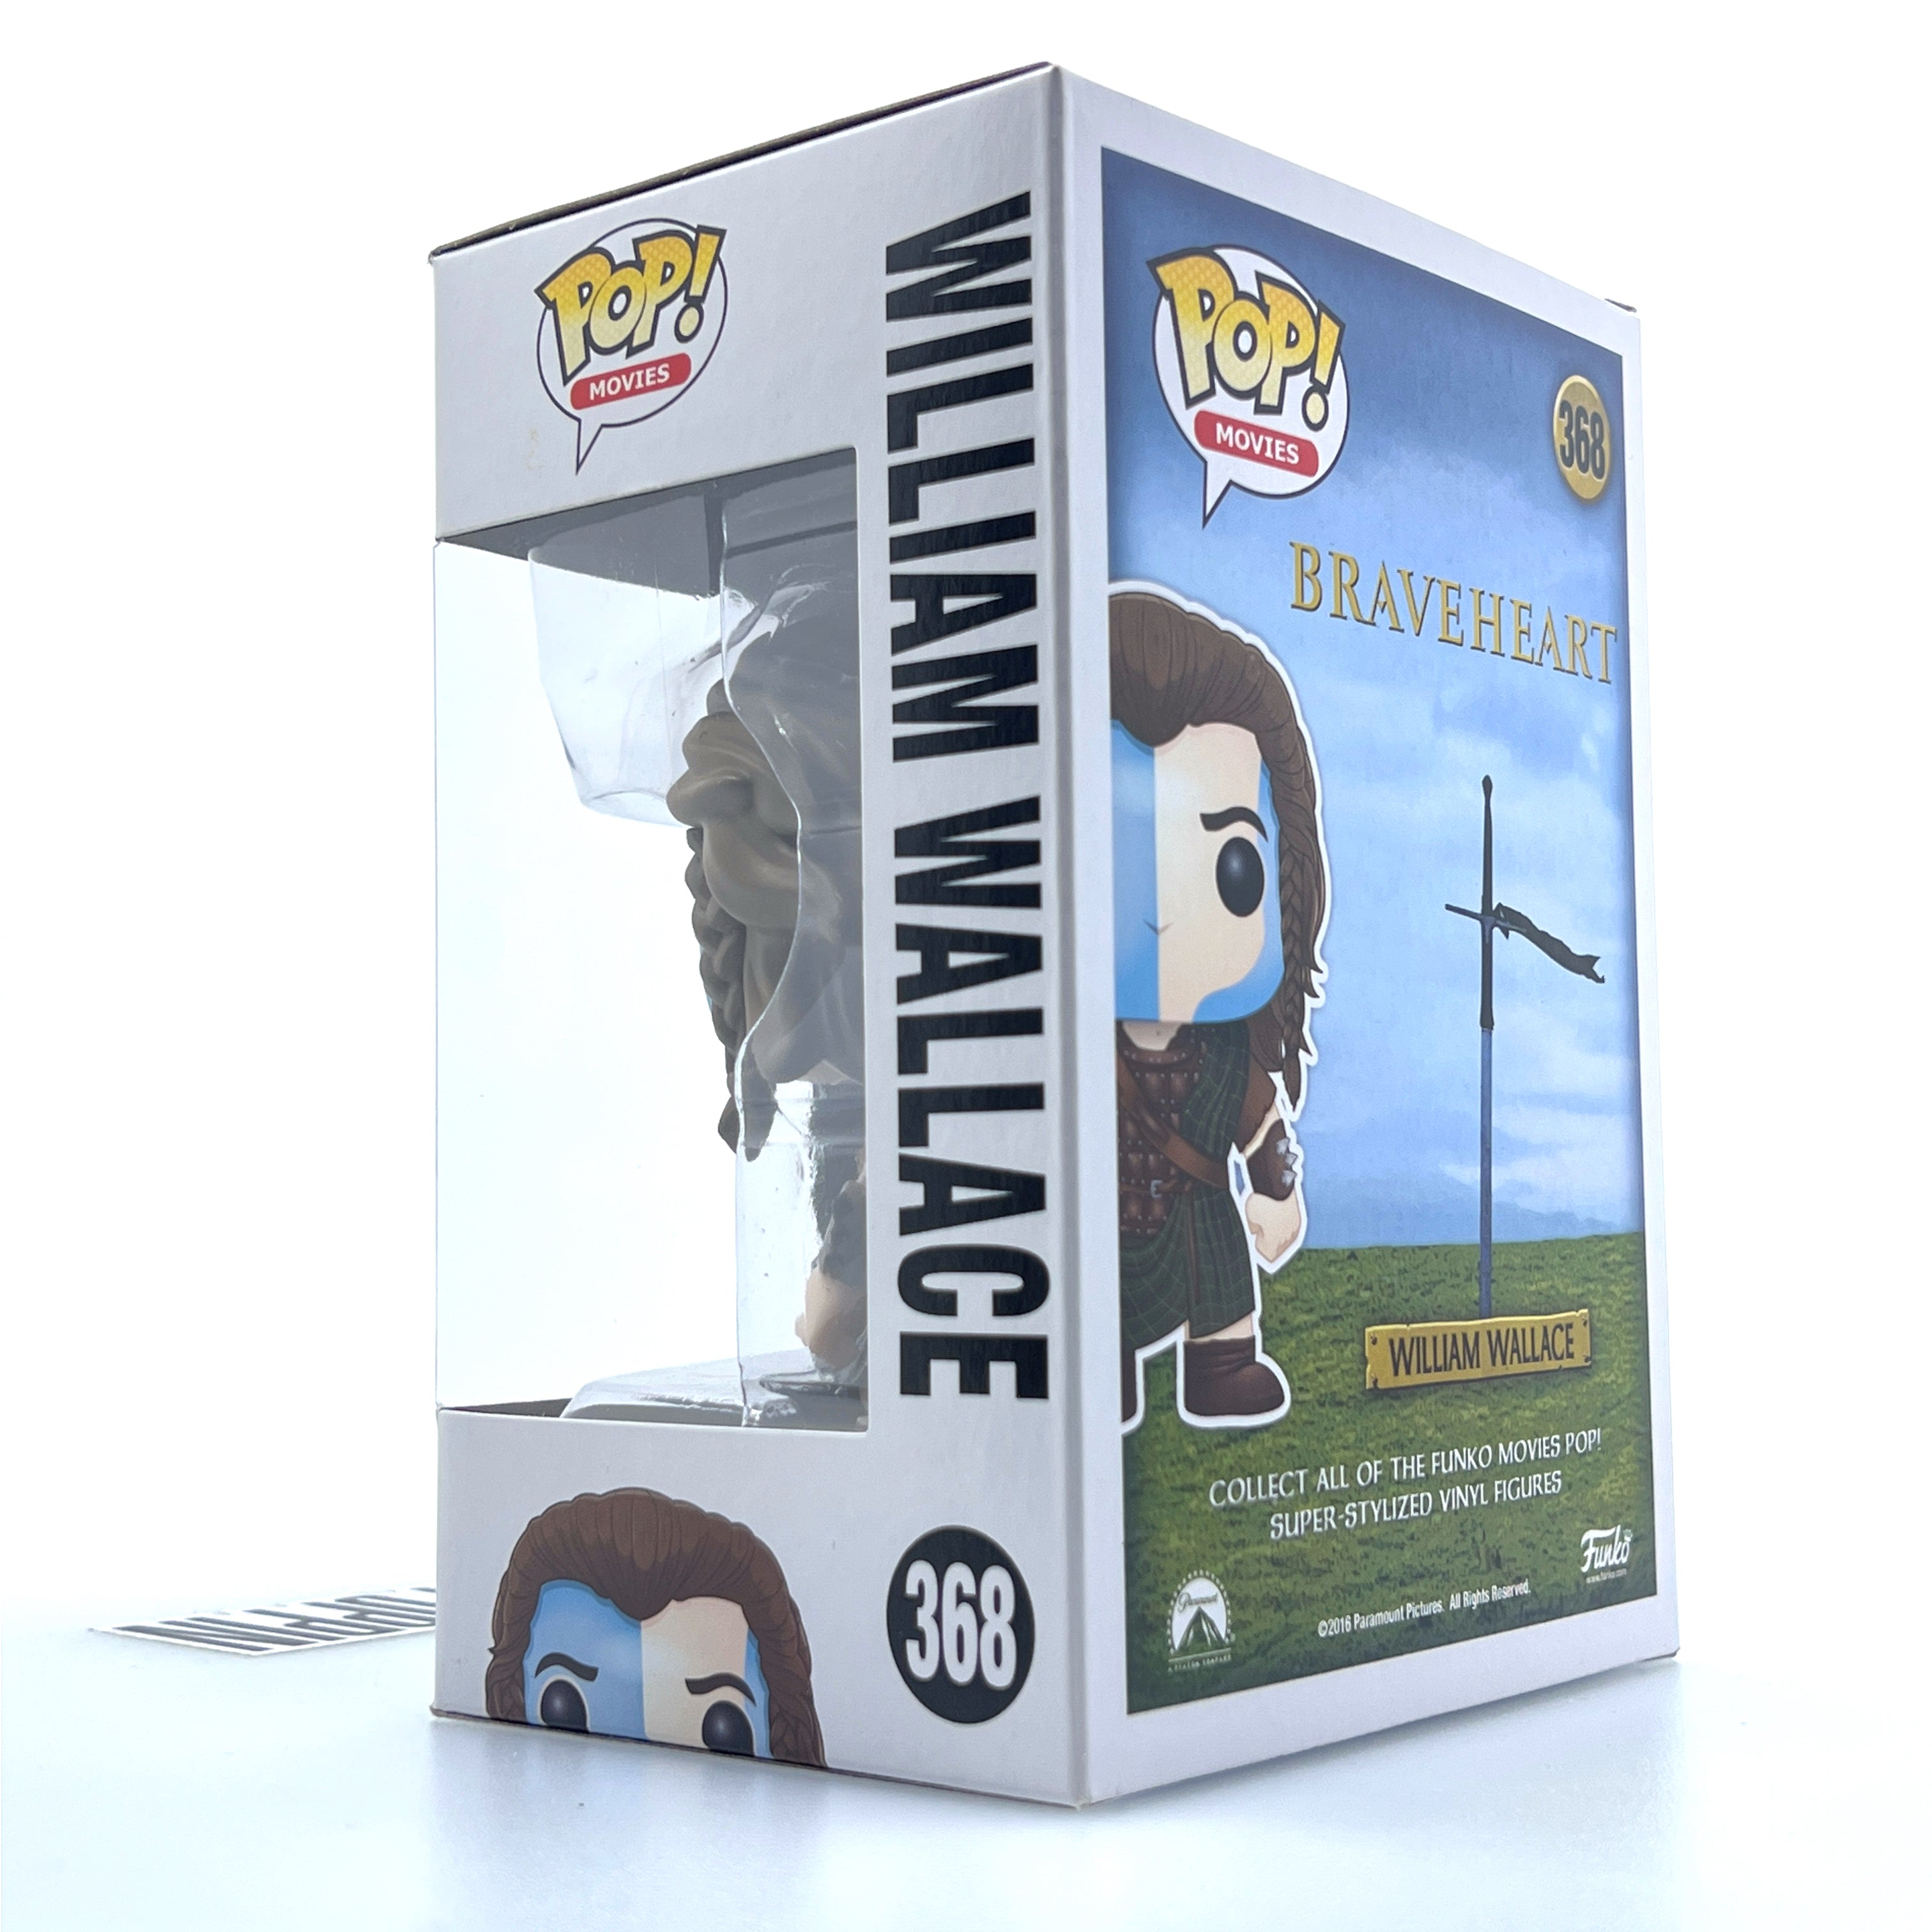 Funko Pop Movies Braveheart William Wallace Vaulted 368